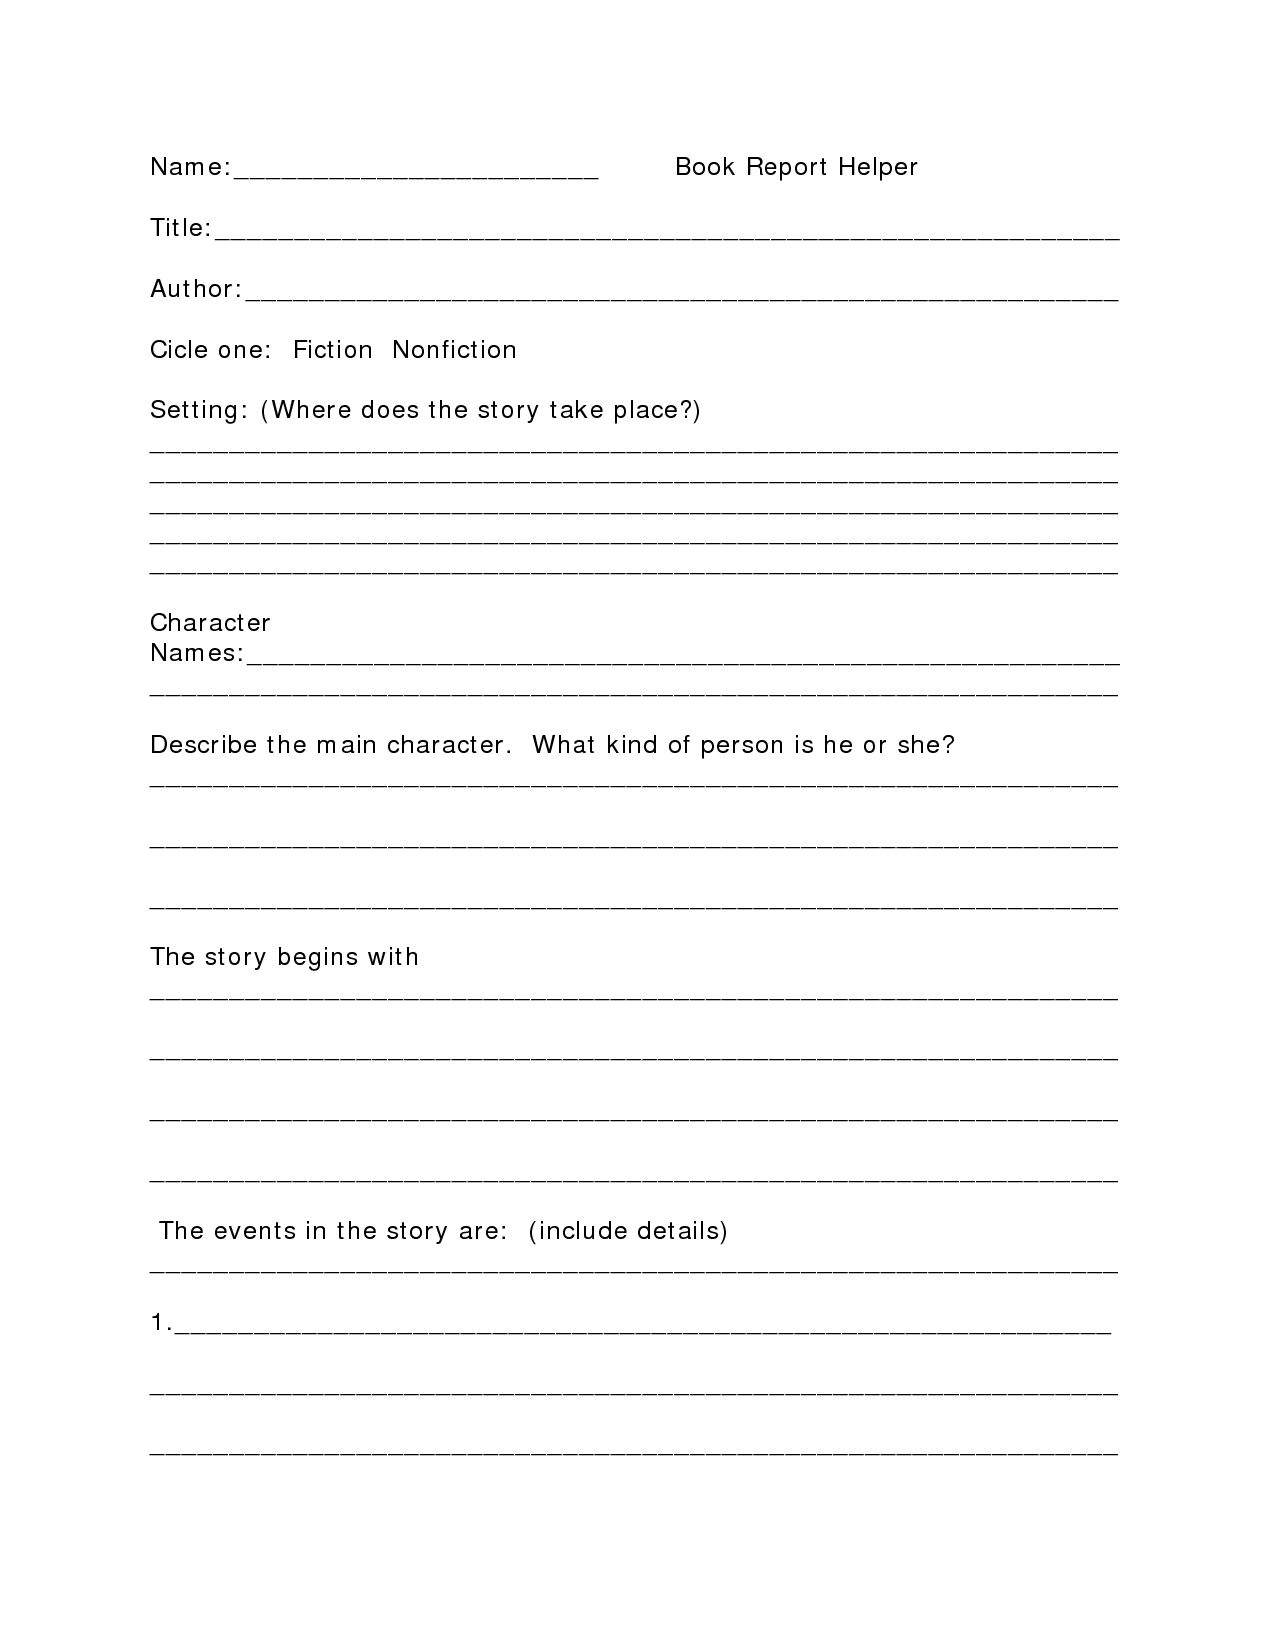 School Book Report Template – Teplates For Every Day With Regard To Book Report Template High School